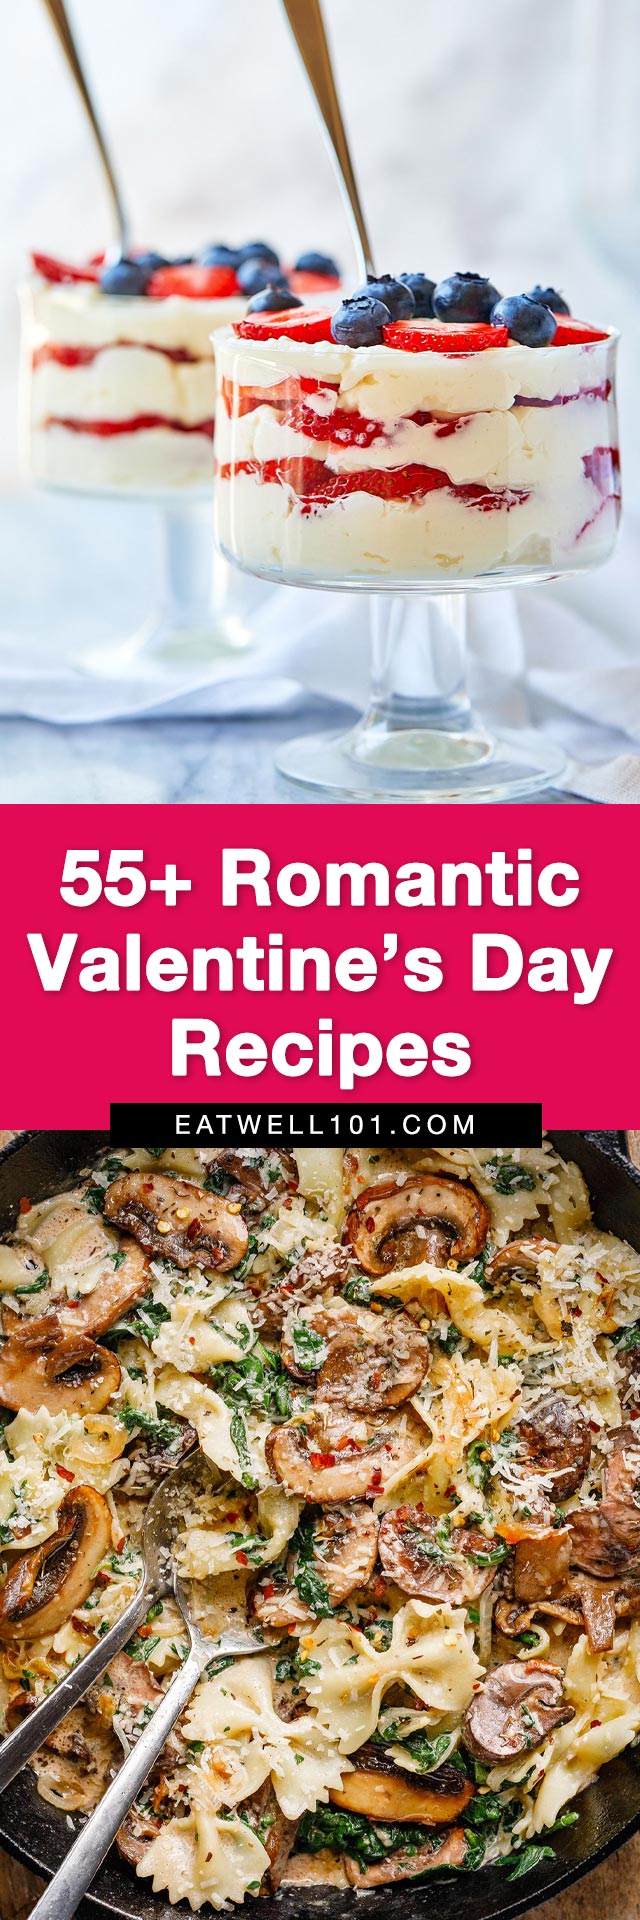 Valentine's Day dinner recipes - #valentine #recipes #eatwell101 - Looking for romantic dinner recipe ideas? From filet mignon to easy pasta recipes, these Valentine's Day dinner recipes will kick off the night on a romantic note! 